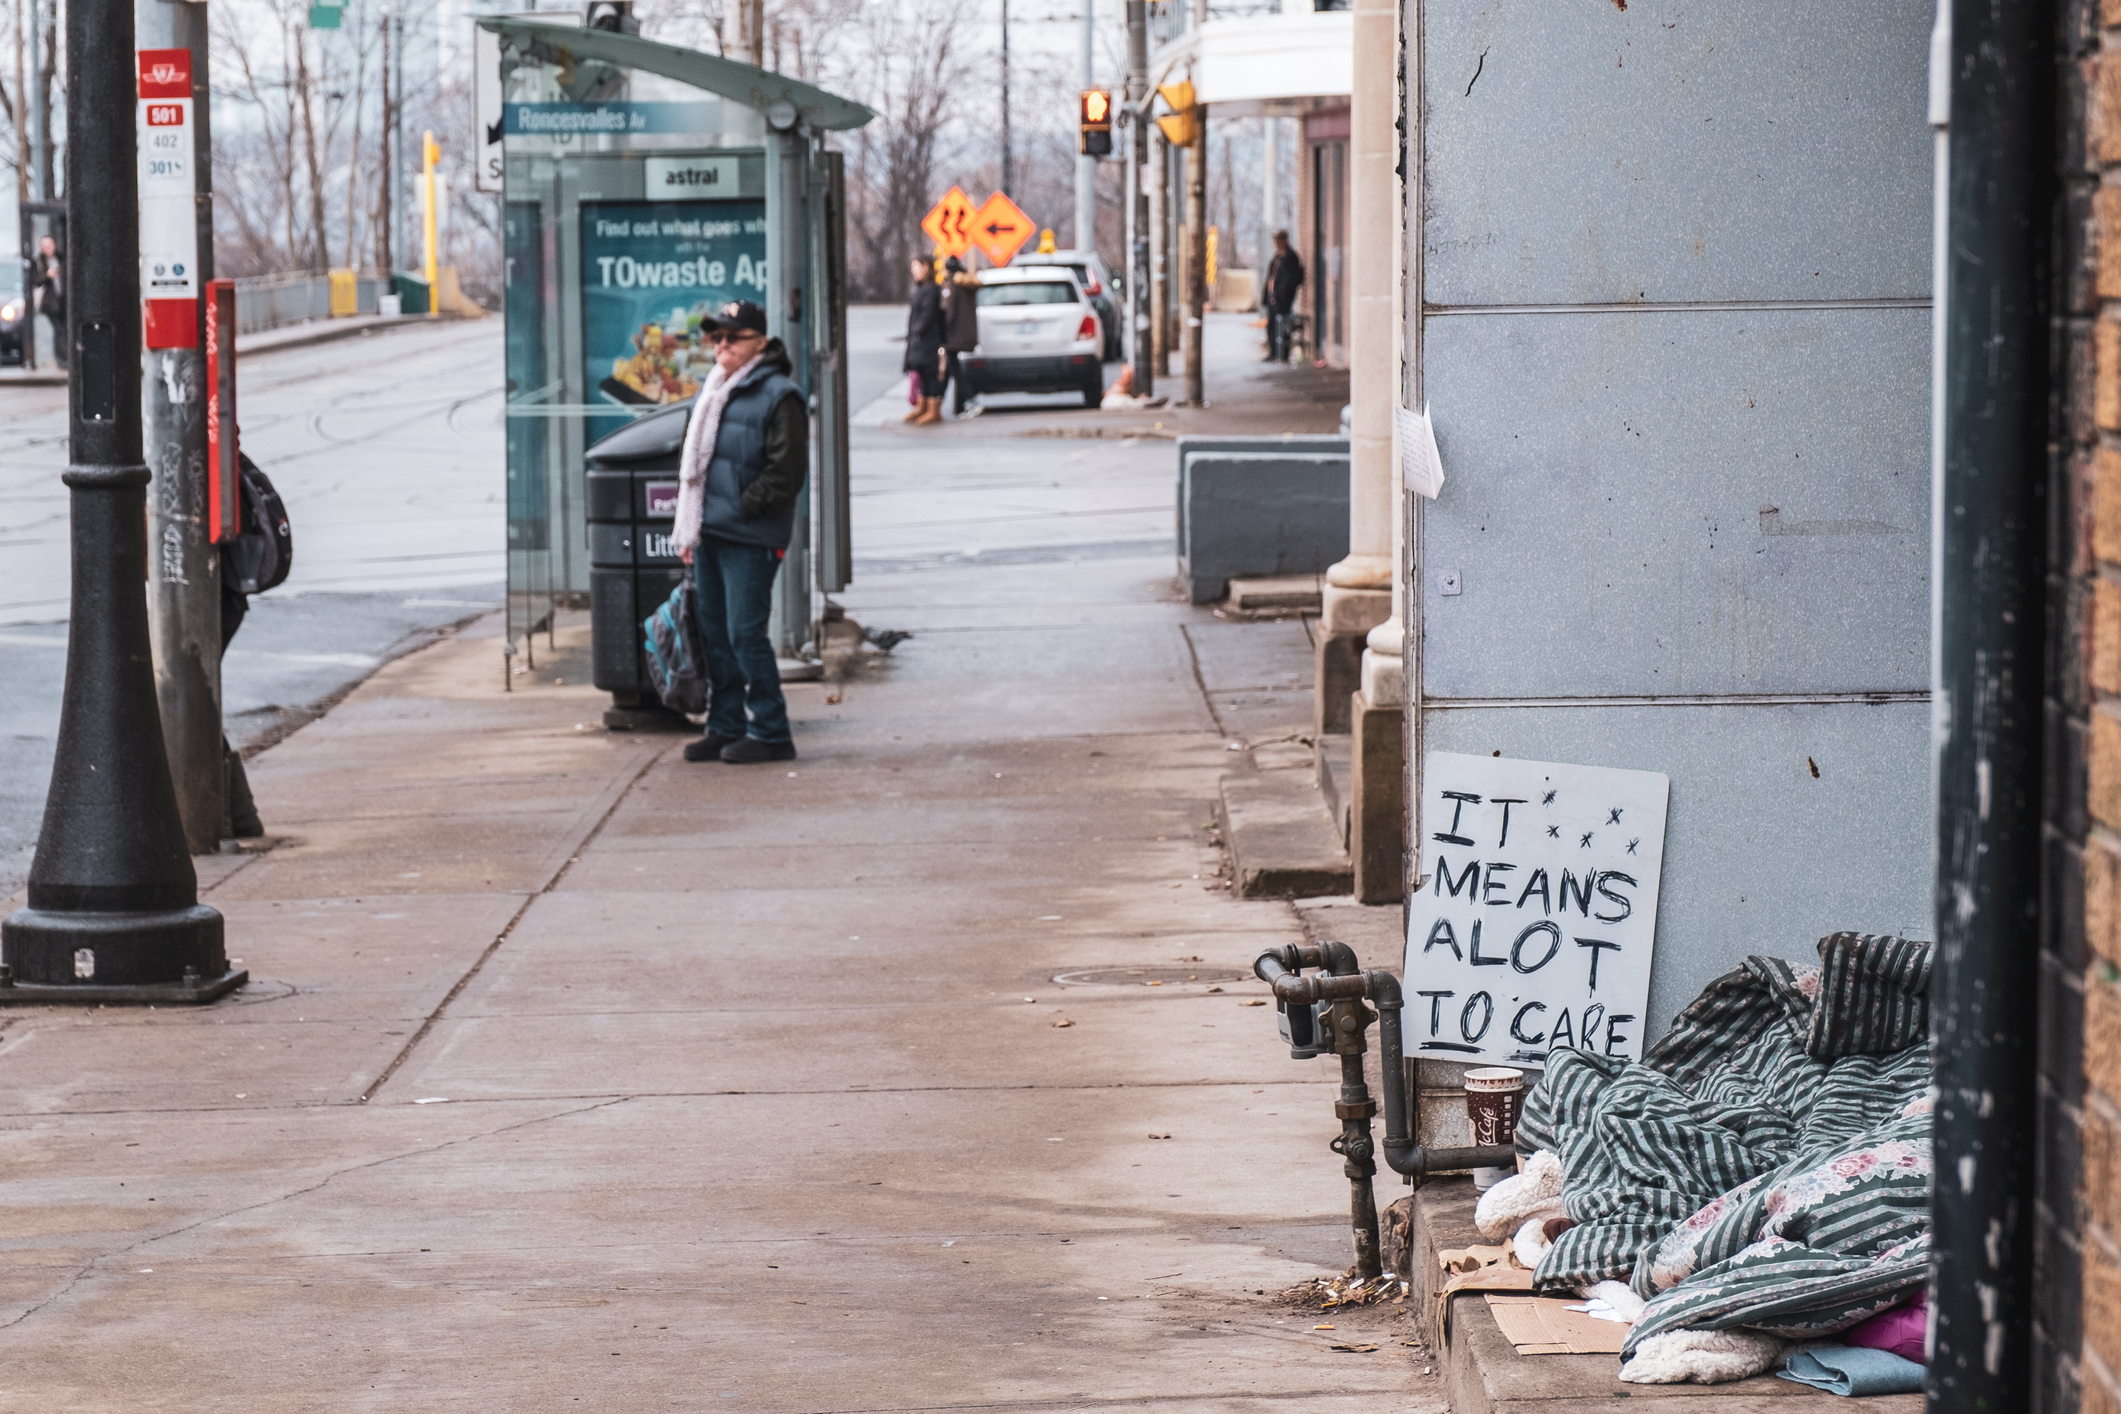 Scene of houseless person with a gratitude sign next to makeshift campsite along a sidewalk in Parkdale. A pedestrian waits for a streetcar in background.